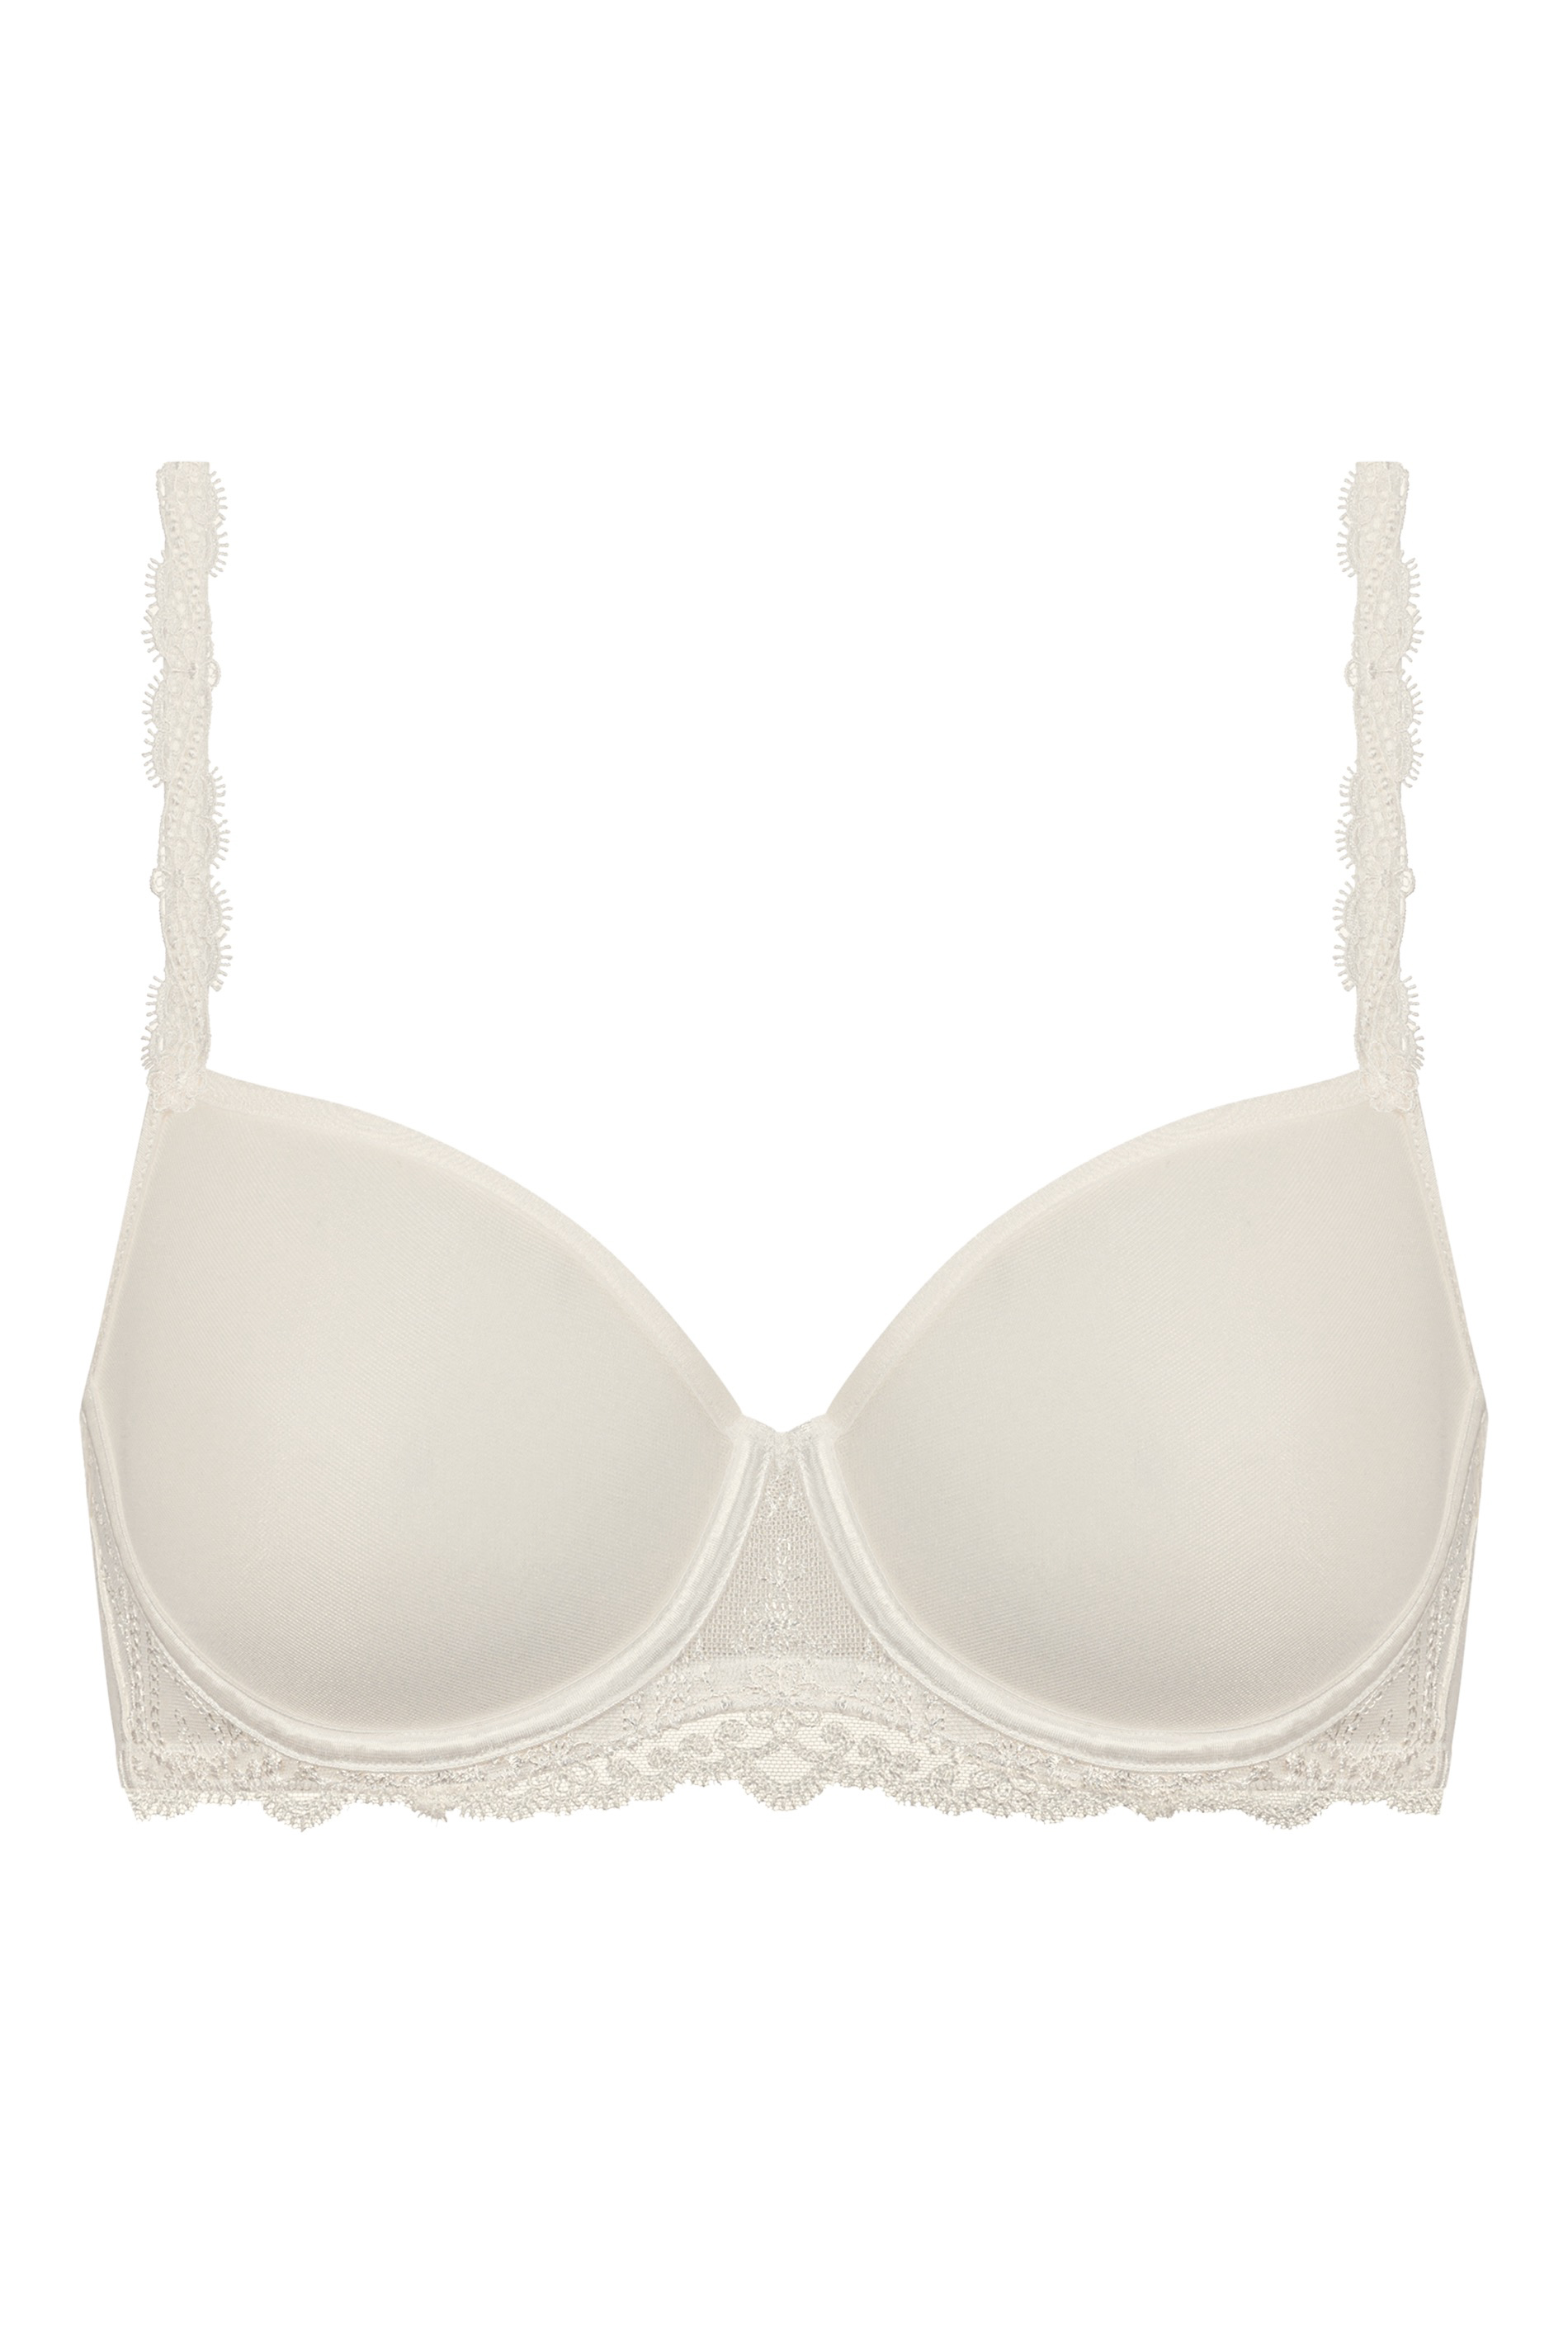 Spacer bra | Half Cup Serie Mysterious Cut Out | mey®